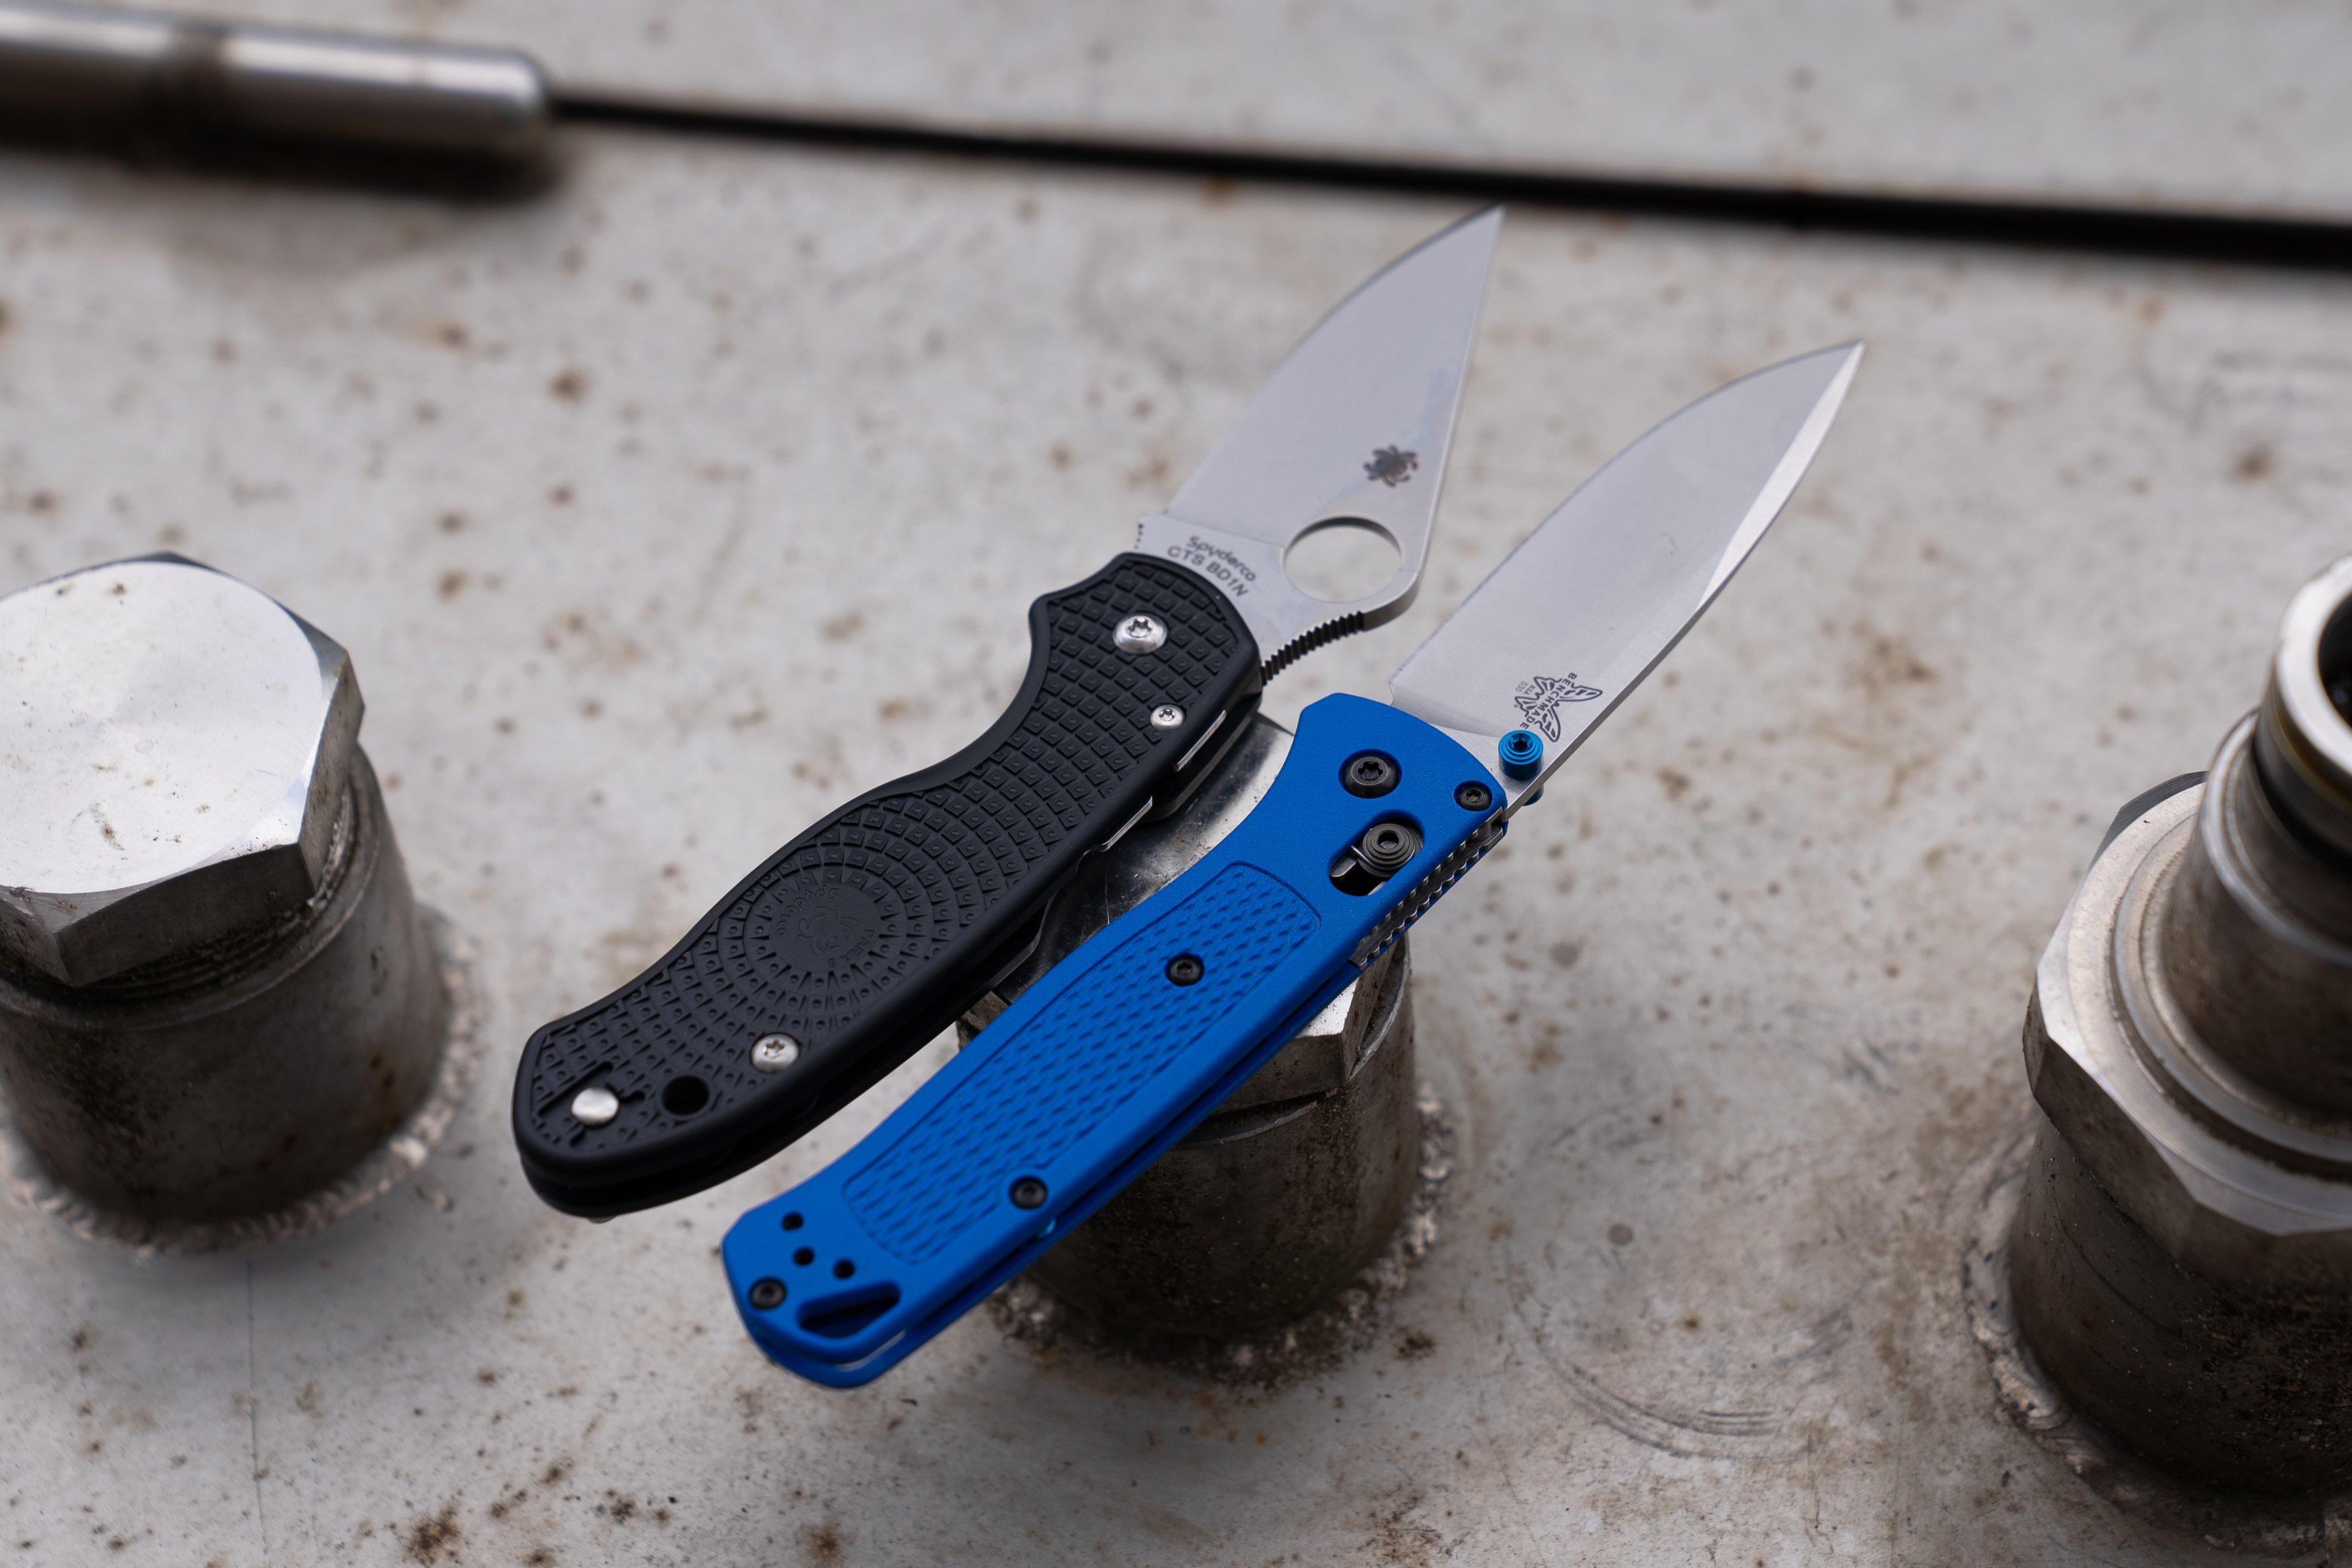 first Benchmade knife/product. I do not own a sharpener besides a